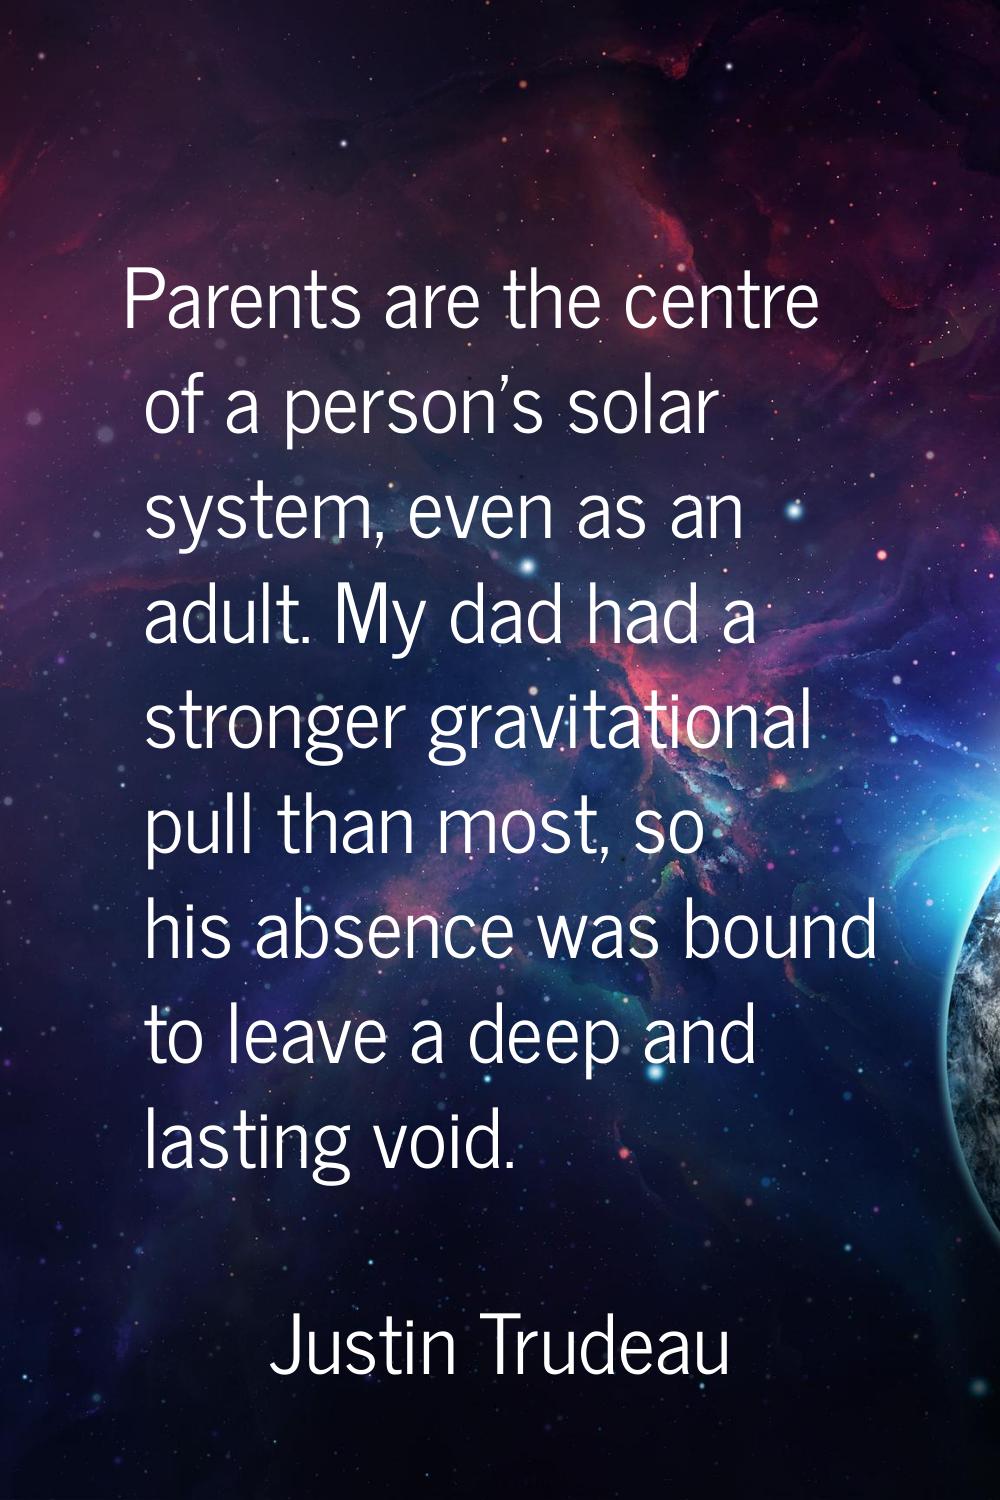 Parents are the centre of a person's solar system, even as an adult. My dad had a stronger gravitat